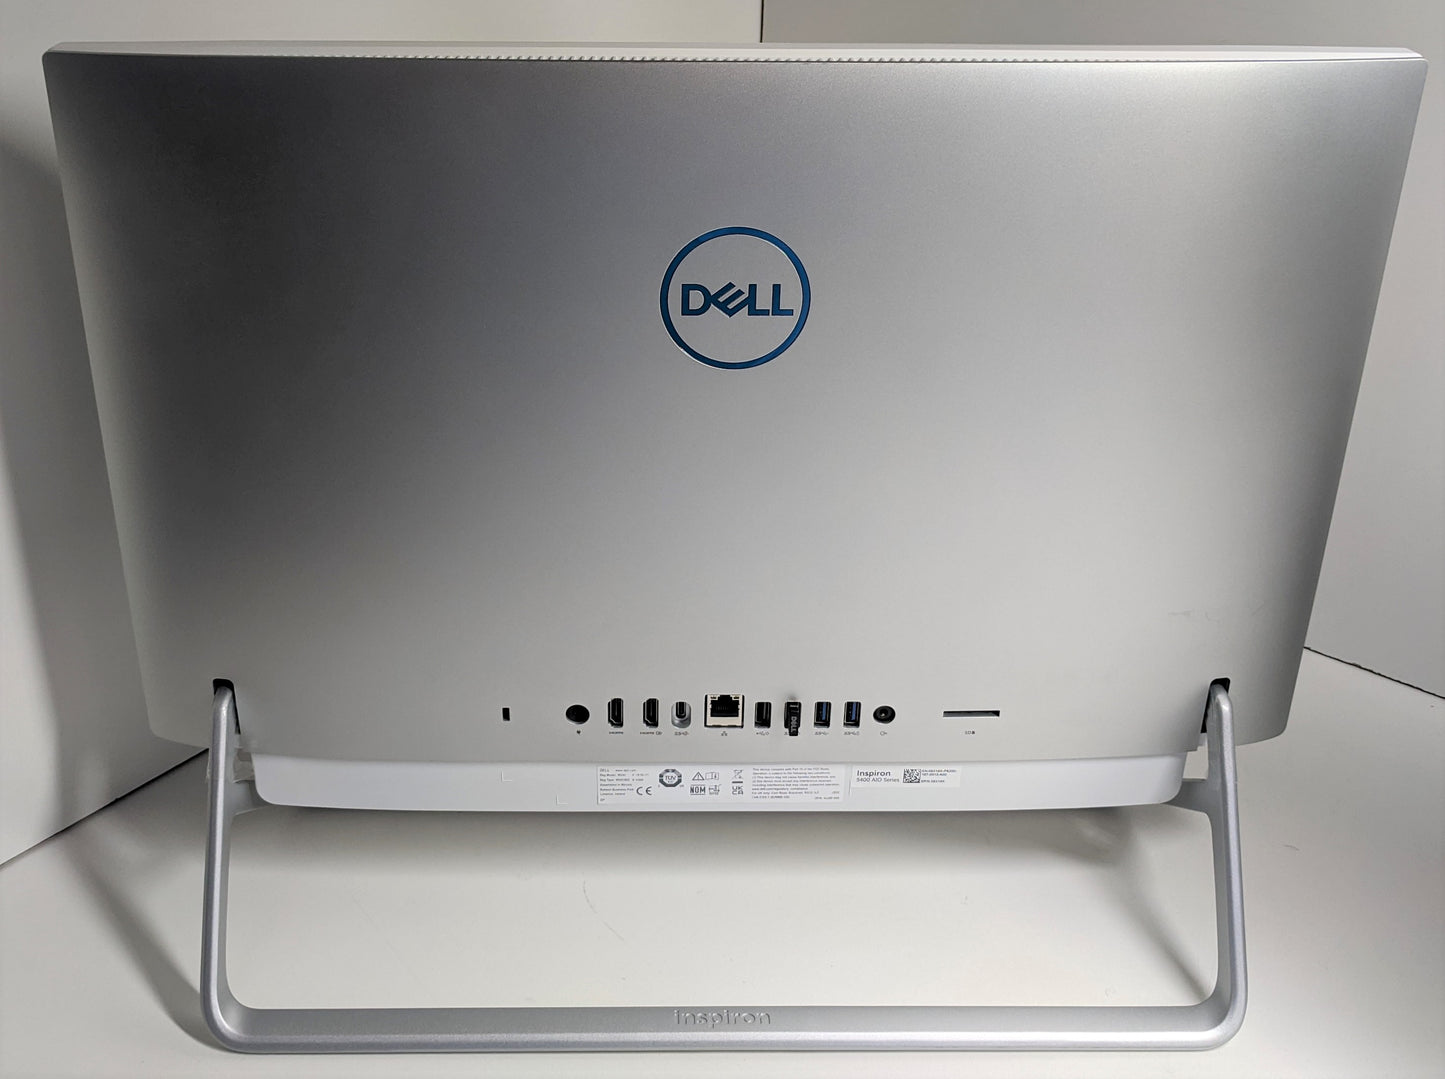 DELL INSPIRON 24 AIO 23.8" FHD i3-1115G4@3GHz, 8GB RAM, 256GB SSD-SCRATCHED